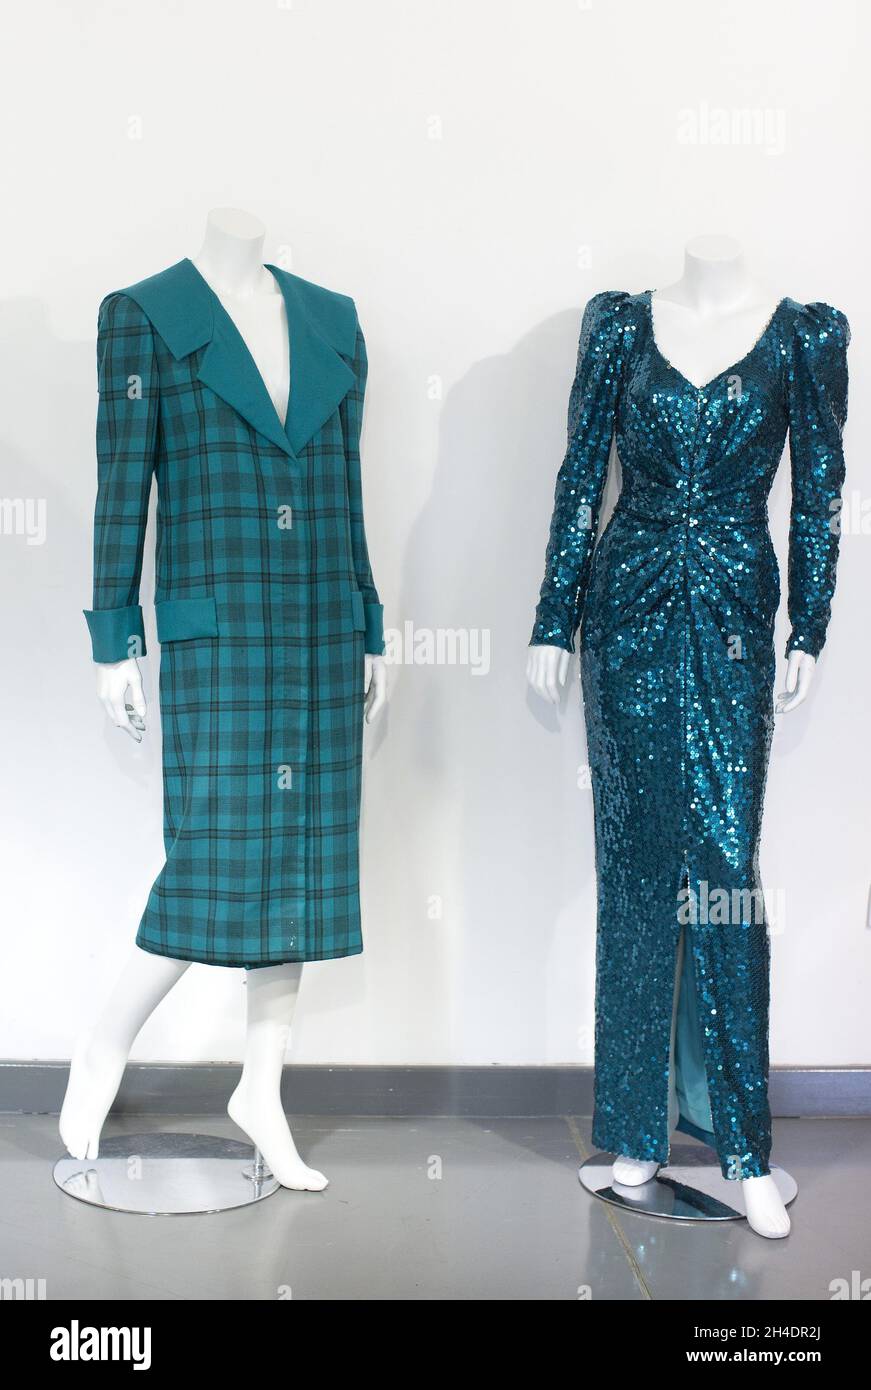 Two dresses worn by Princess Diana, both in shades of teal-blue/green, part of the June 14th  Passion for fashion auction at Kerry Taylor Auctions in south London.  (Left) Lot 208, is a practical outfit, a large tartan check with wide padded shoulders with Diana's trademark sailor-collar, designed by Elizabeth and David Emanuel, estimate £10,000-15,000.  (Right) Lot 210, is a glamorous gown split to the knee by designer Catherine Walker, estimate £80,000-100,000. Stock Photo